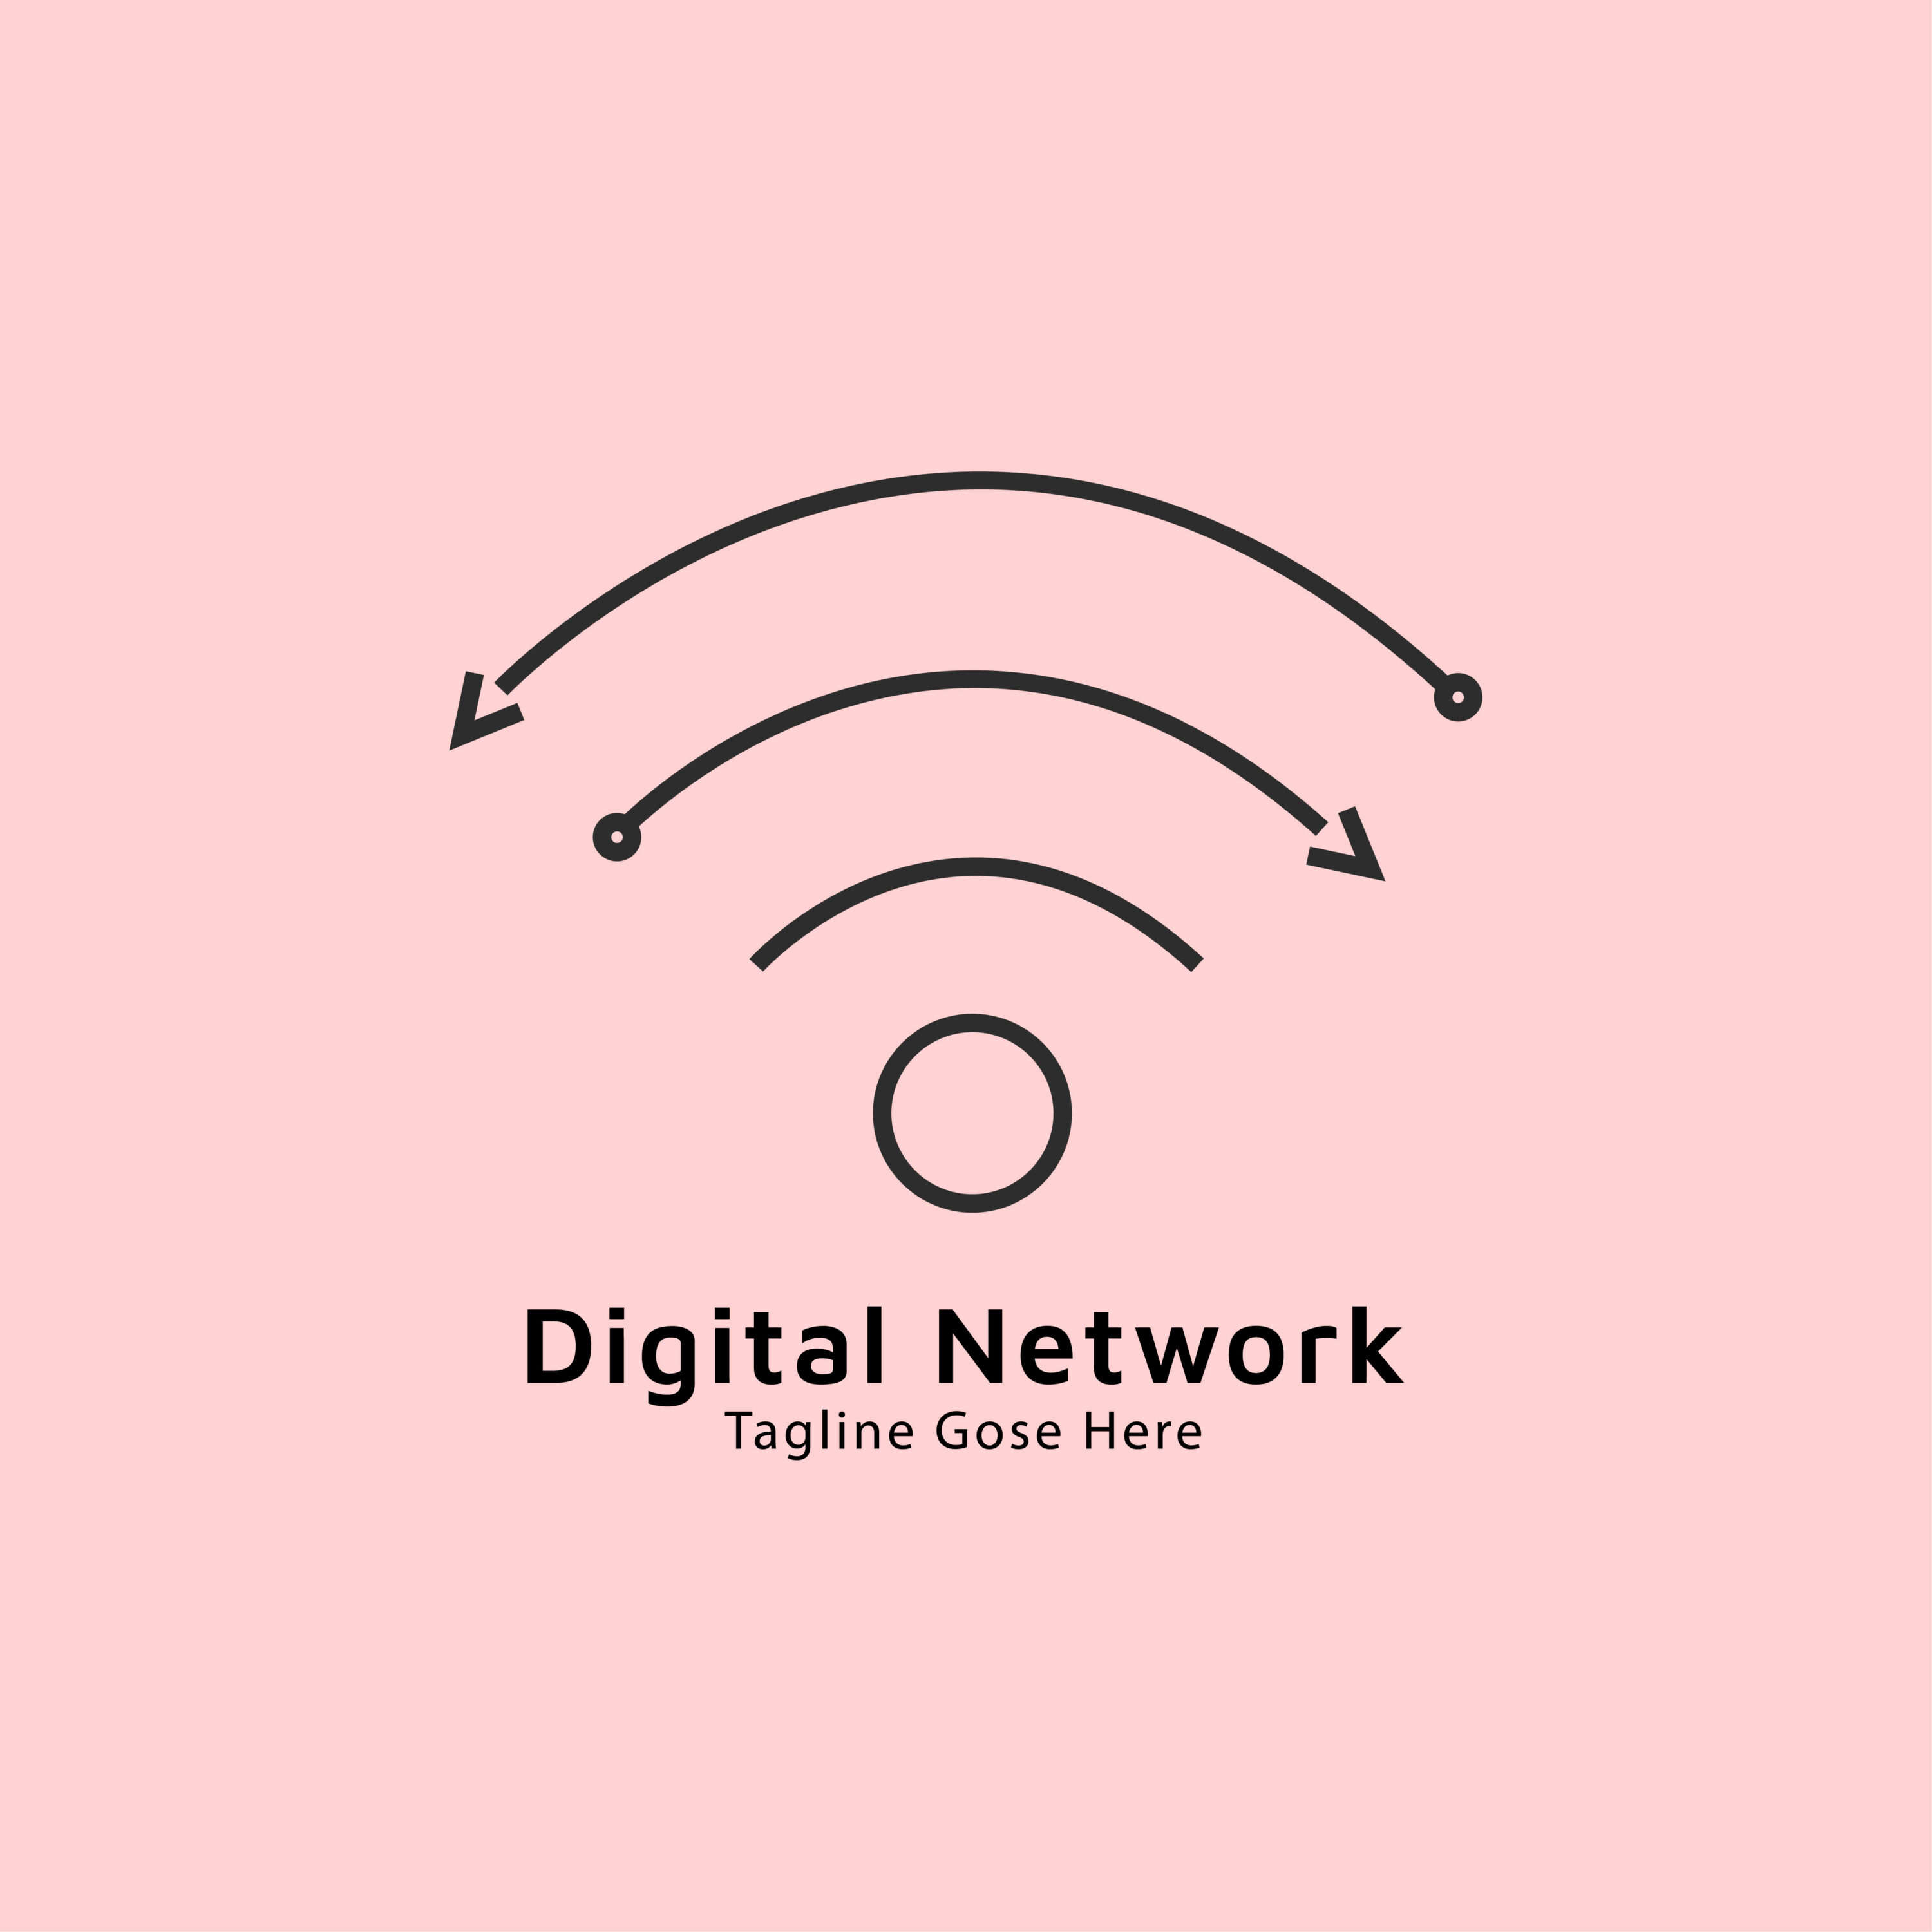 Two Technical and Network Logo Design Template for your business.